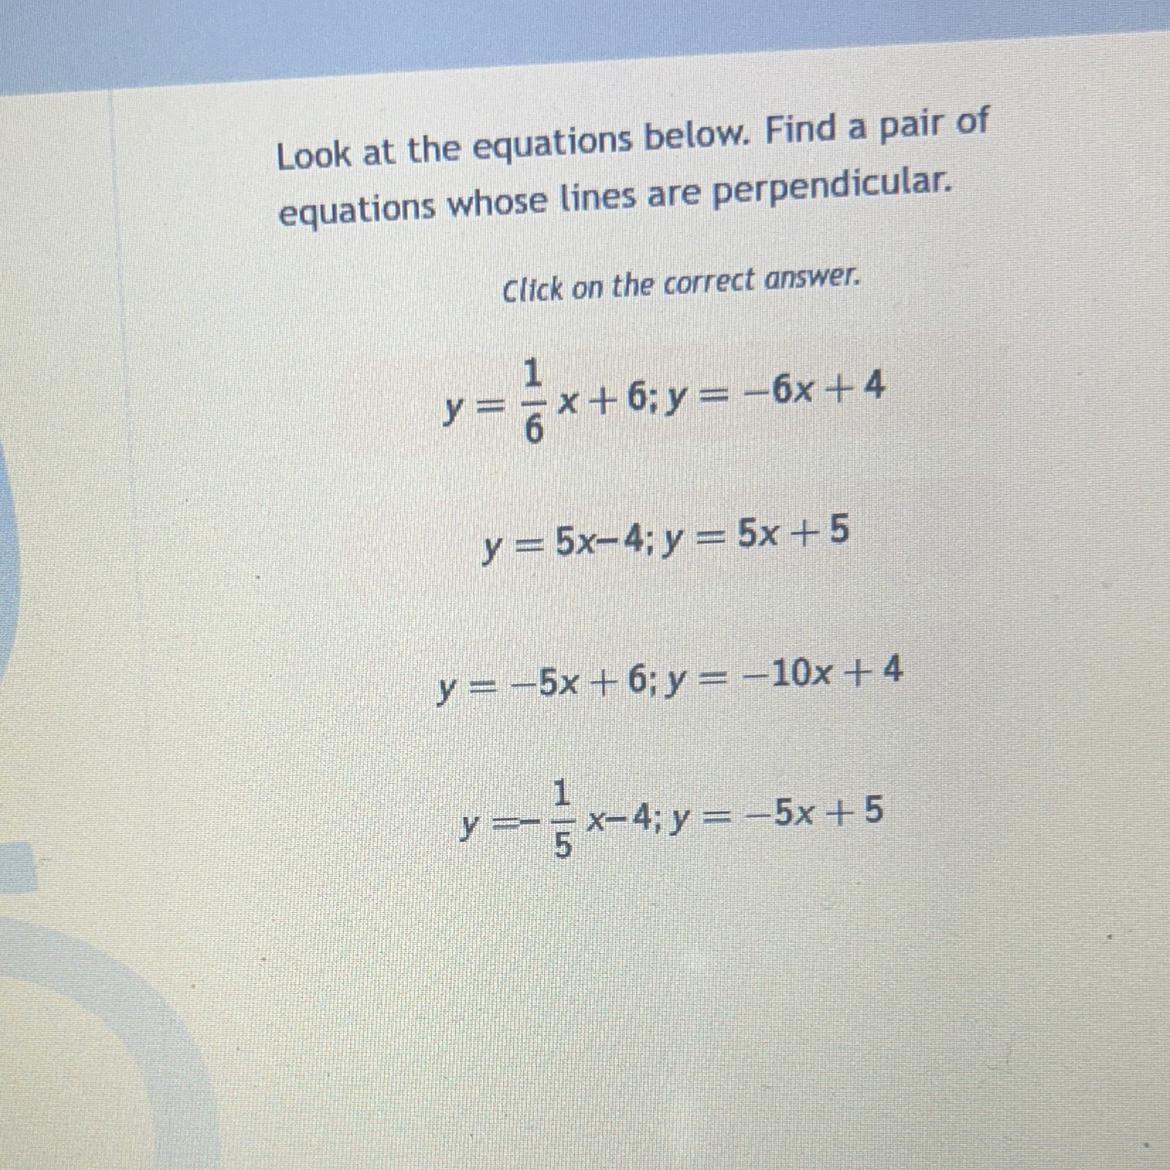 Look At The Equations Below. Find A Pair Ofequations Whose Lines Are Perpendicular.Click On The Correct